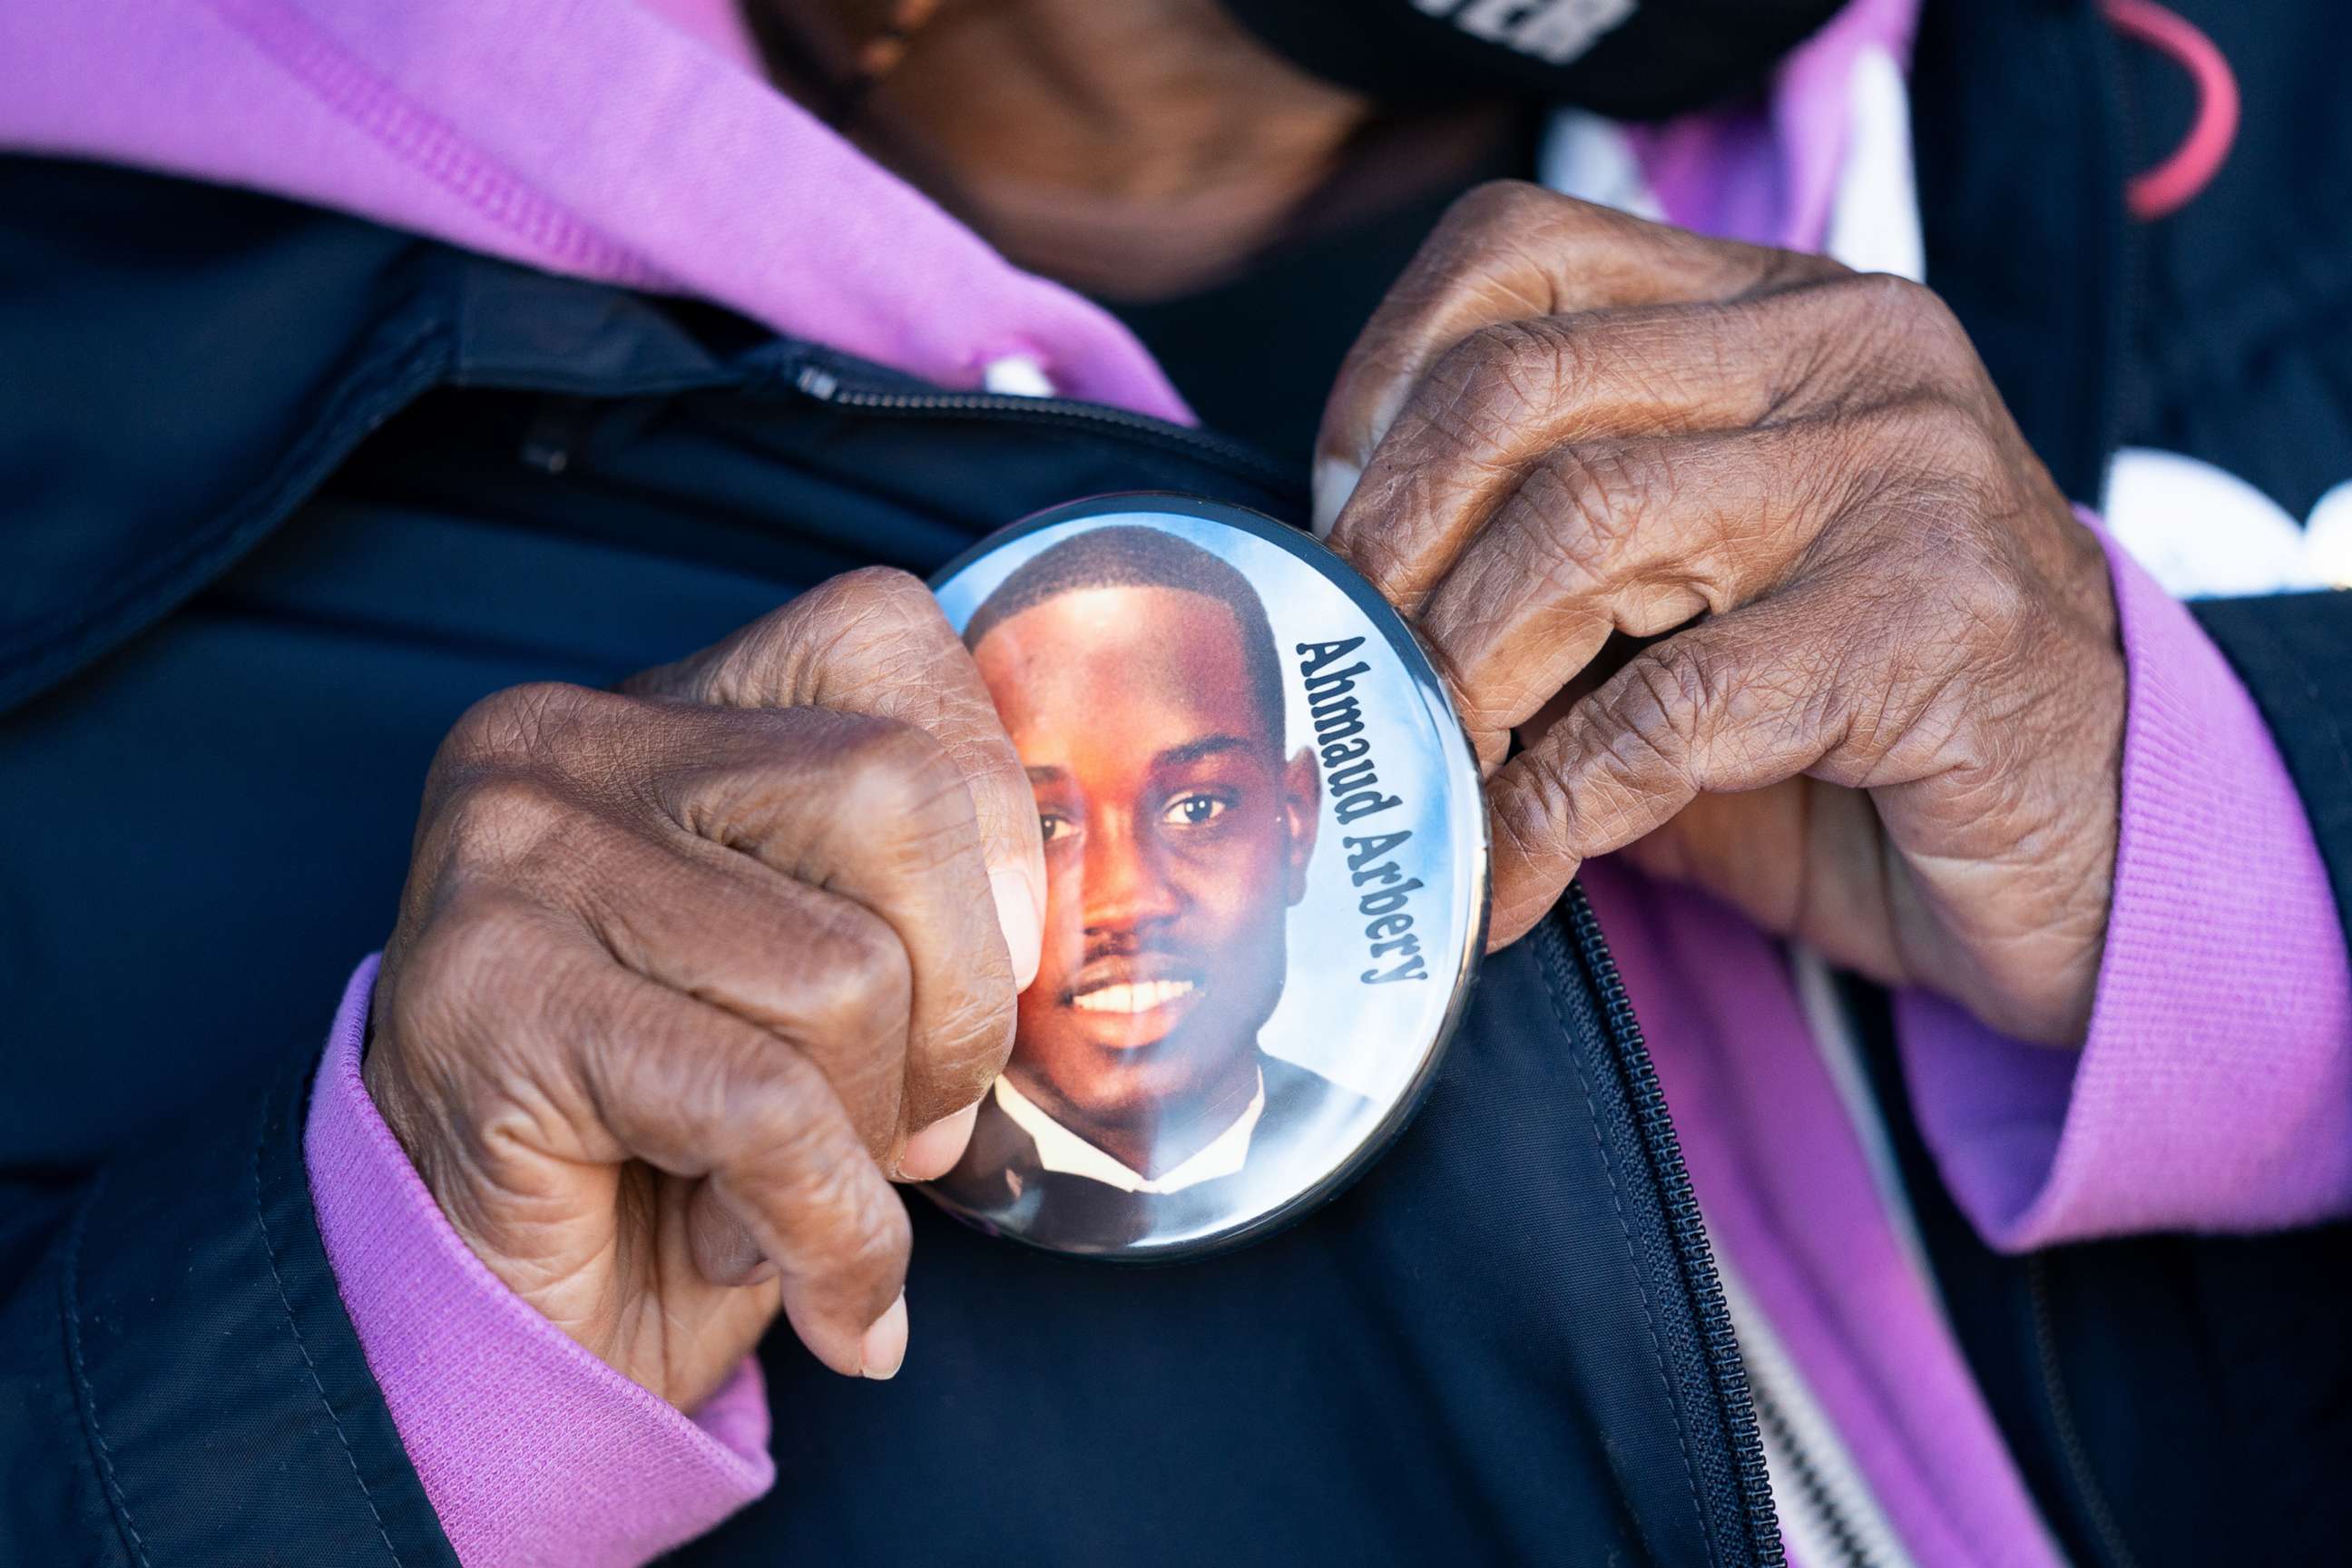 PHOTO: Annie Polite puts on a button for Ahmaud Arbery outside the Glynn County Courthouse as the jury deliberates in the trial of the killers of Ahmaud Arbery in Brunswick, Ga., Nov. 24, 2021.